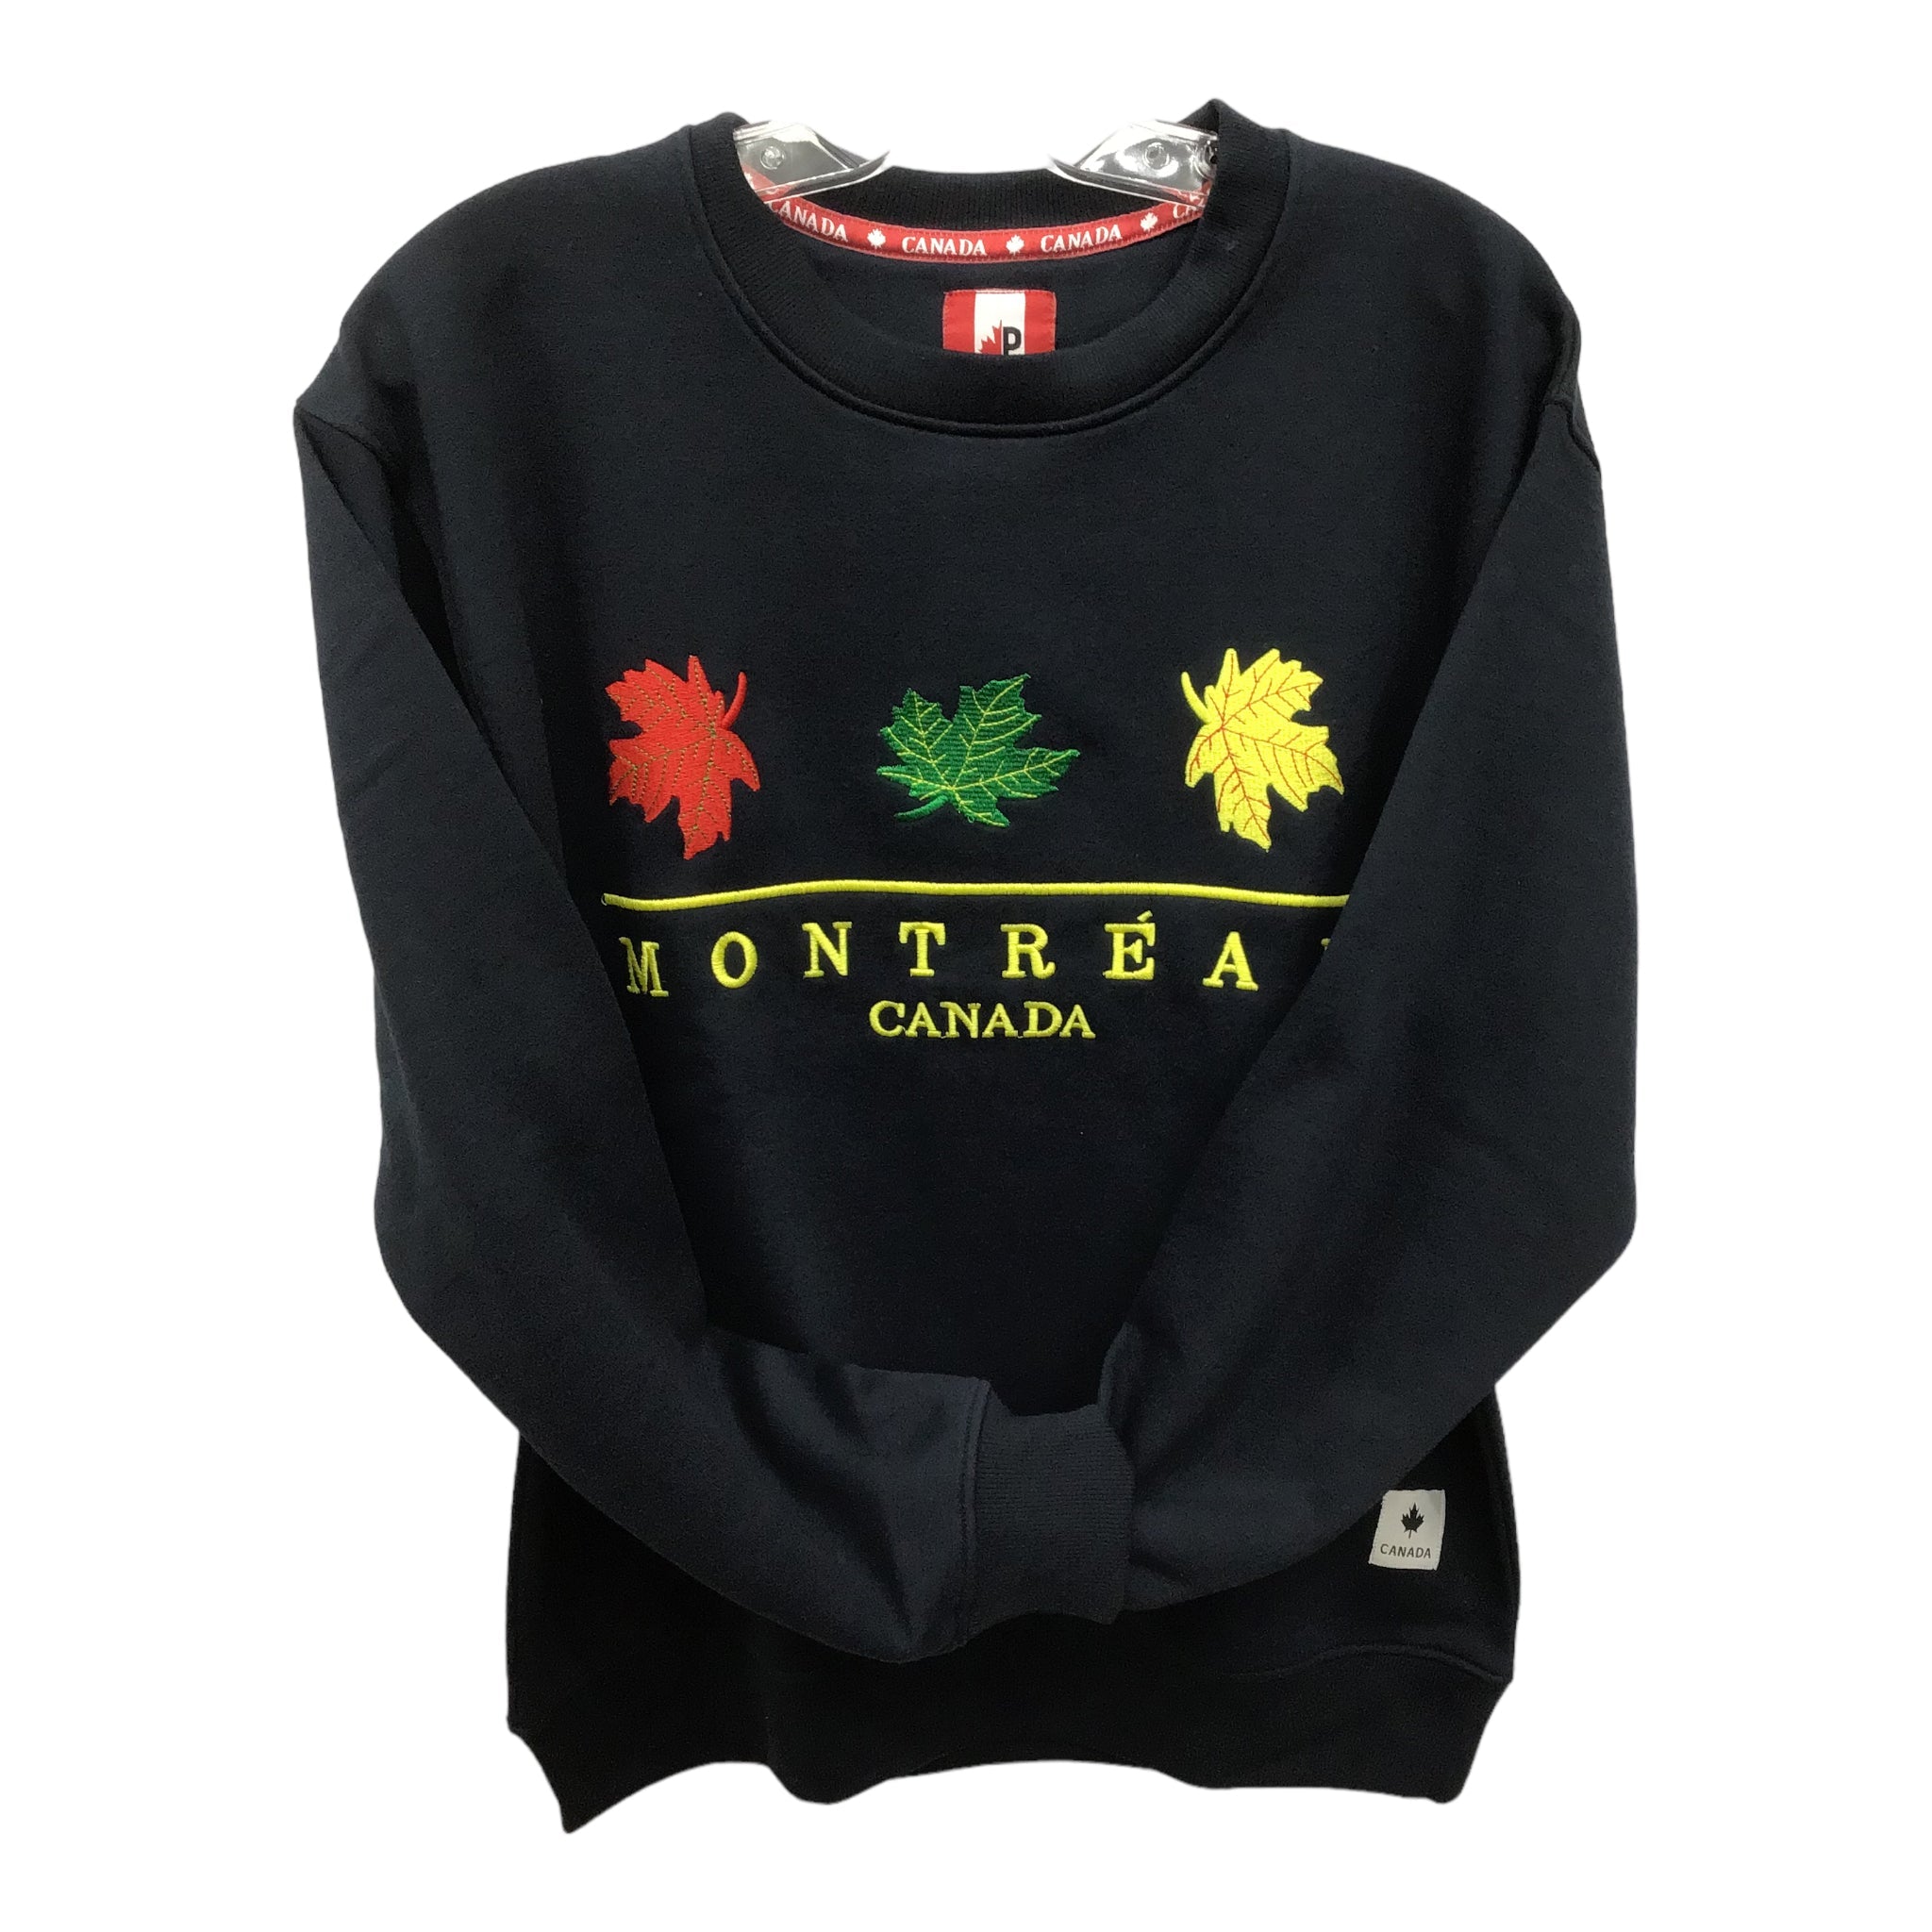 Montreal Crew Neck Sweatshirt Navy W/ Red Green & Yellow Maple Leaf Embroidery for Men and Women